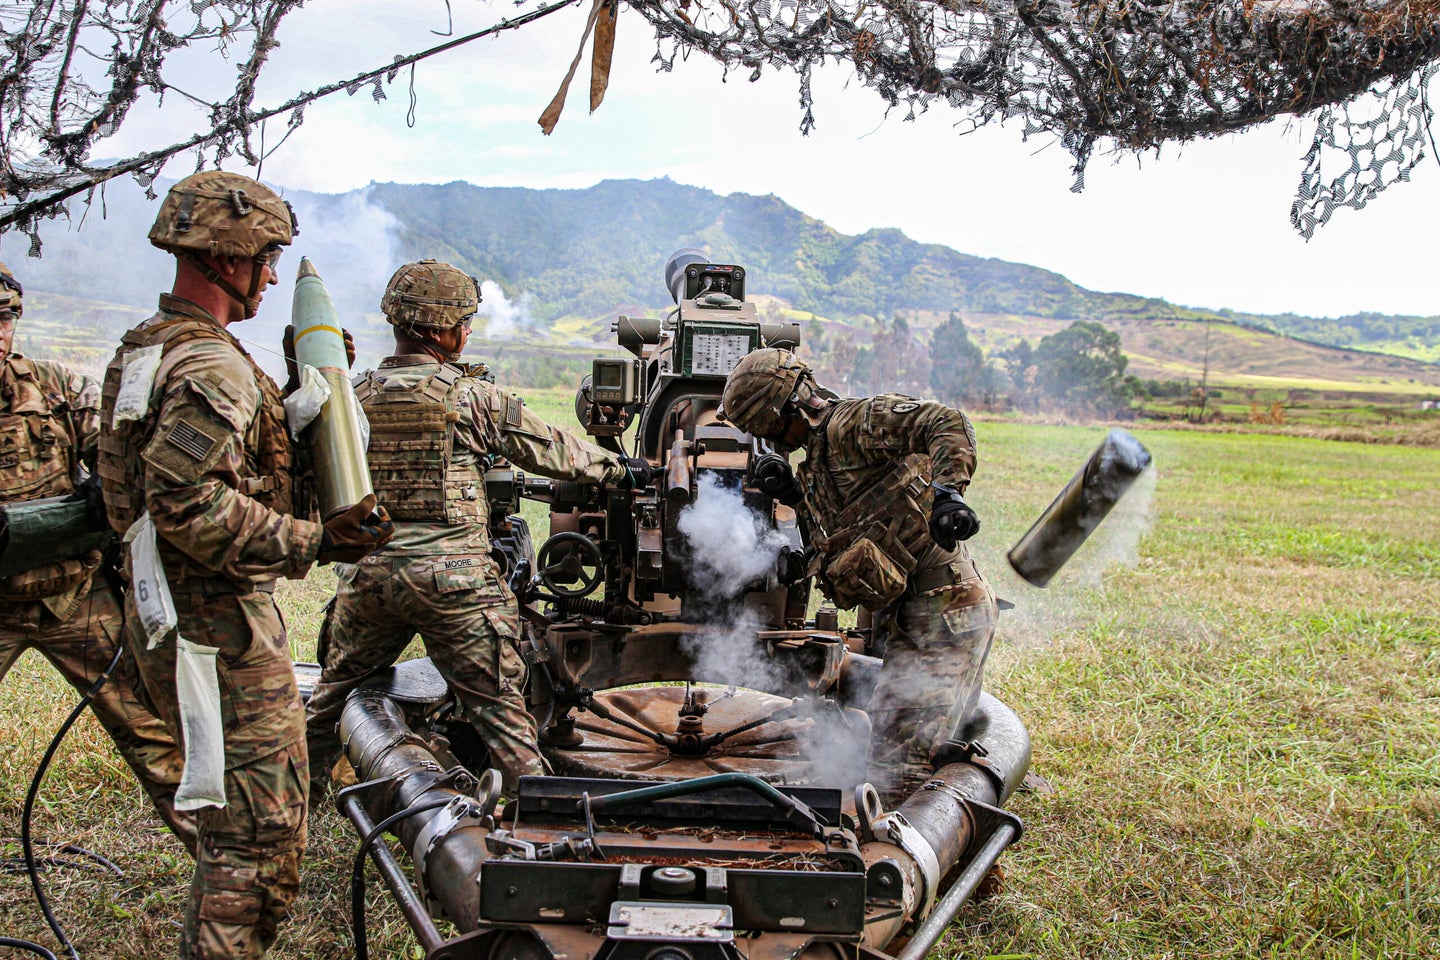 Soldiers with 2nd Battalion, 11th Field Artillery, 25th Infantry Division work with M119 Howitzers to enhance their basic artillery skills on Schofield Barracks, Hawaii, June 14, 2020. Cannon Crewmembers from the "On Time" Battalion play a vital role during missions by supporting ground forces, handling ammunition, operating weapon systems, and calculating targets. (U.S. Army photo by 1st Lt. Stephanie Snyder)